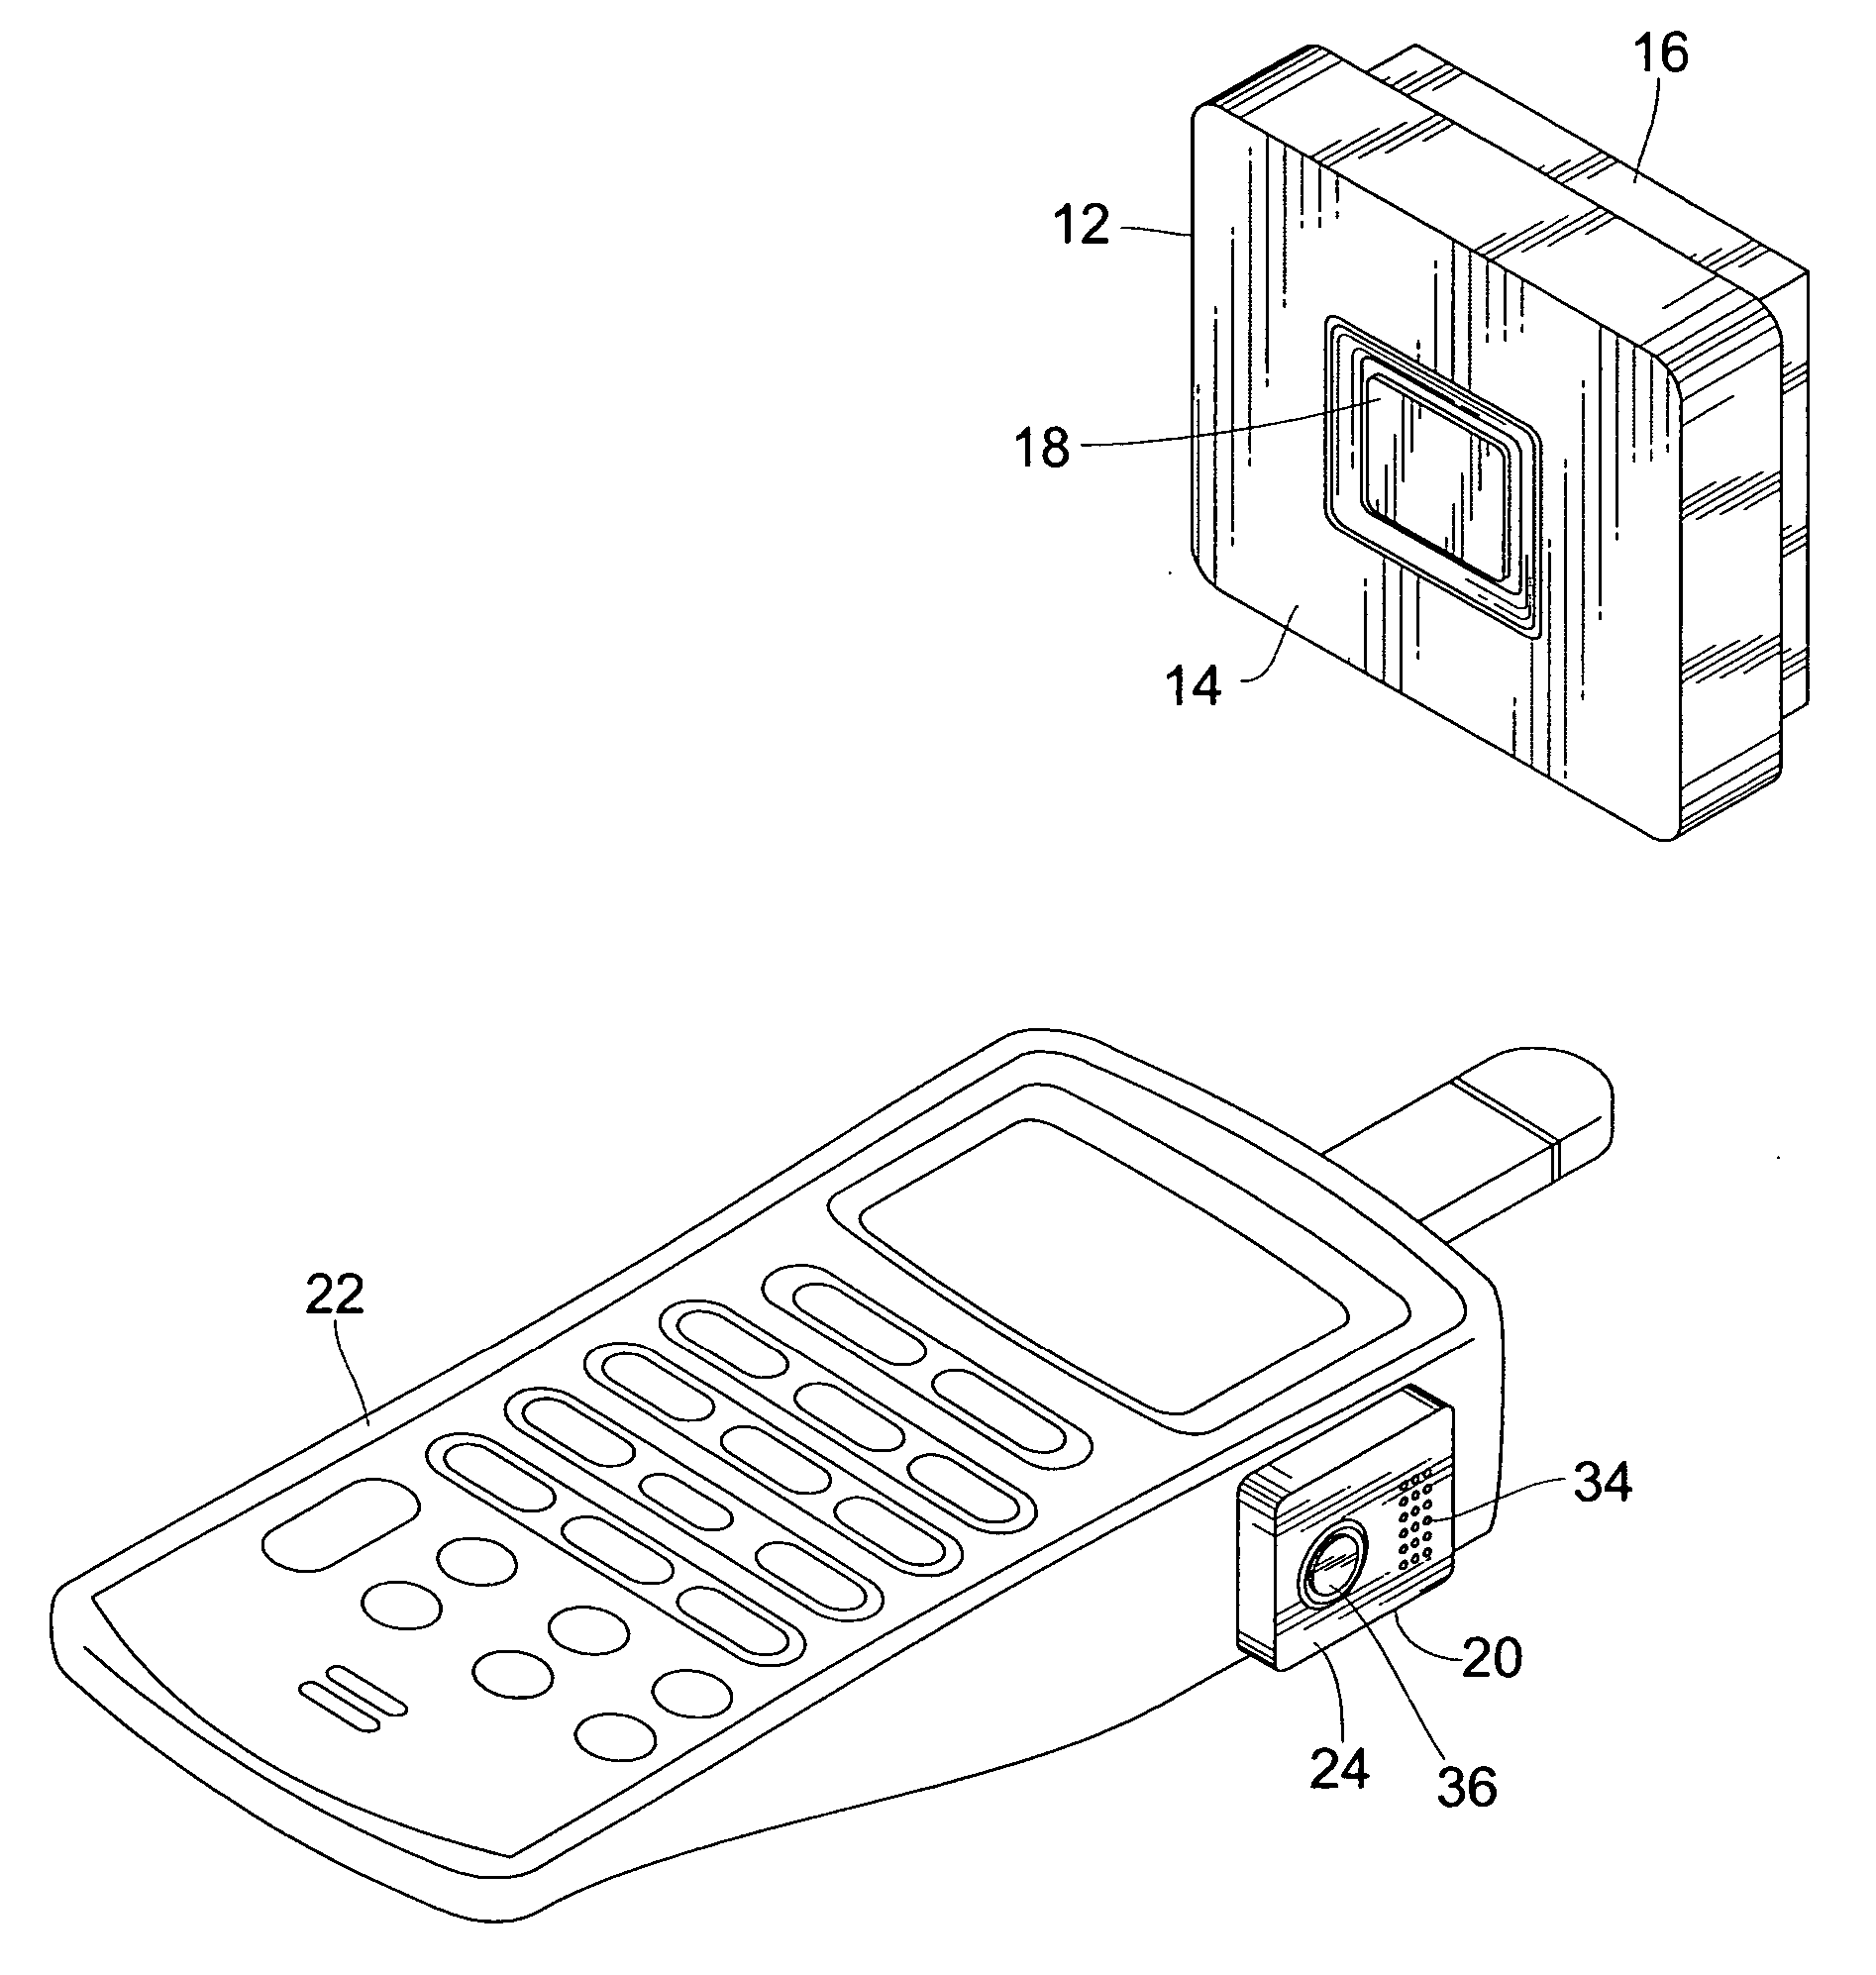 System and apparatus for locating misplaced or lost items and accessories